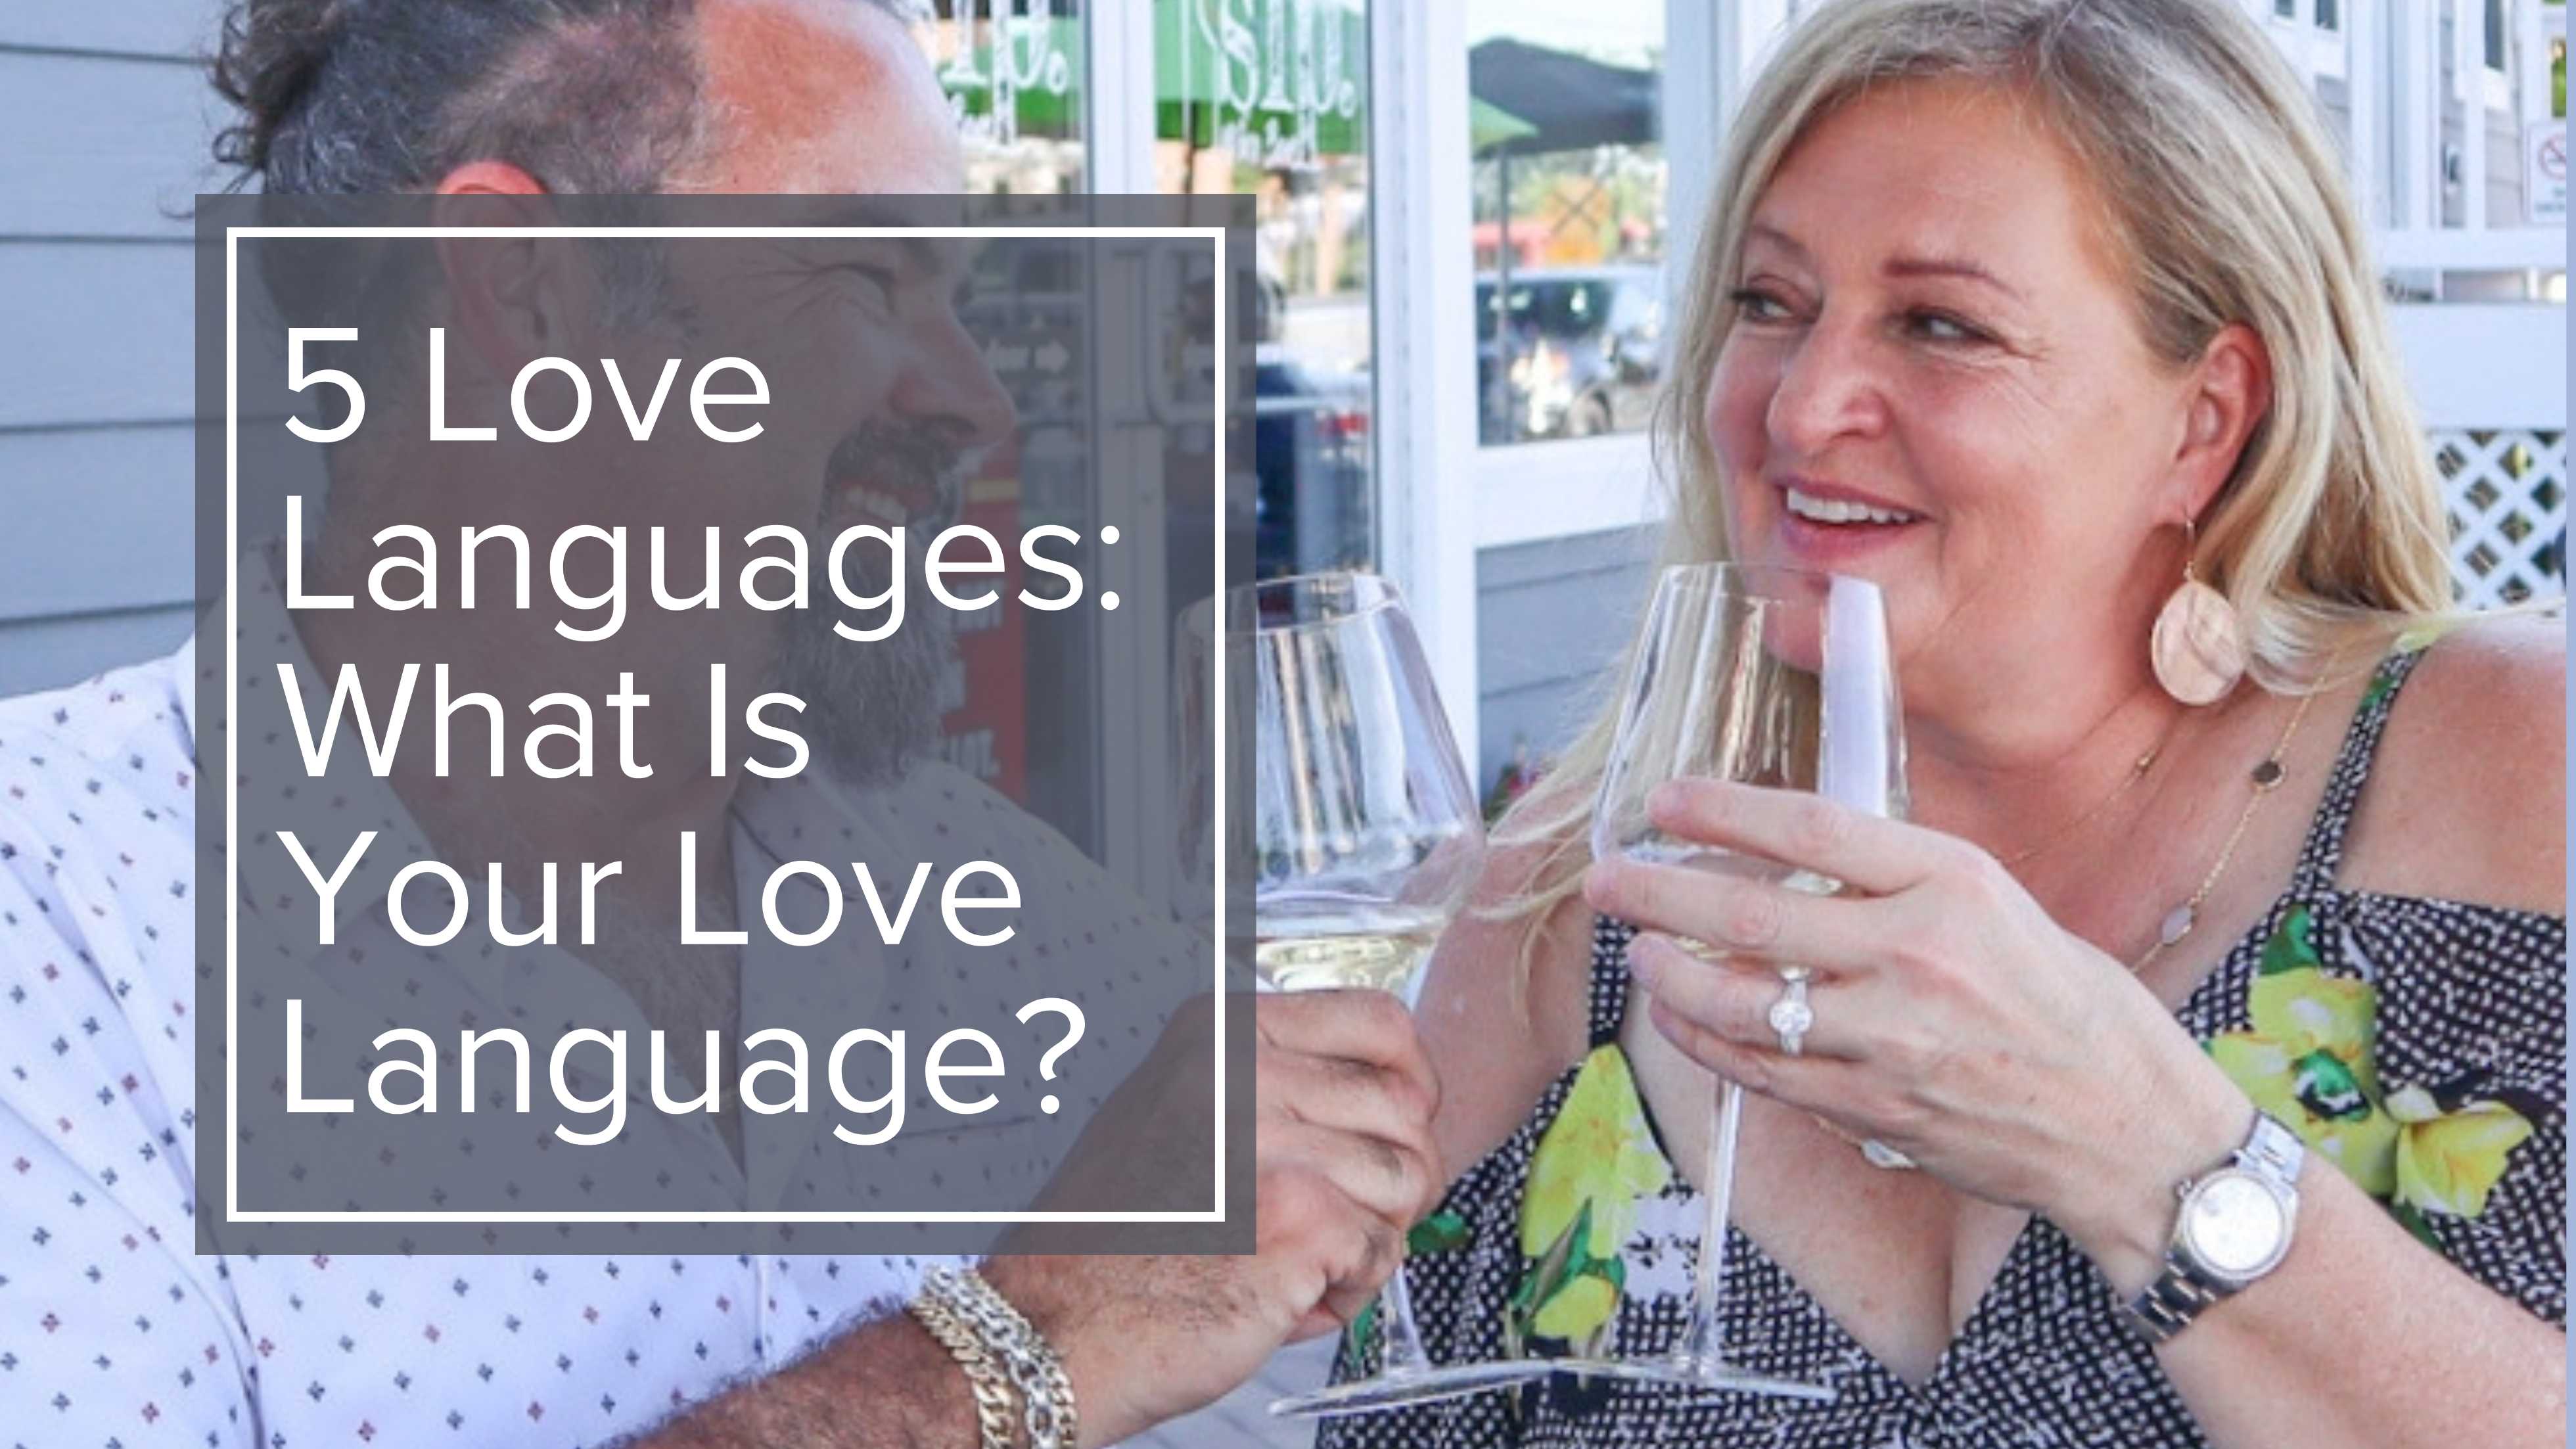 5 Love Languages: What Is Your Top Love Language?